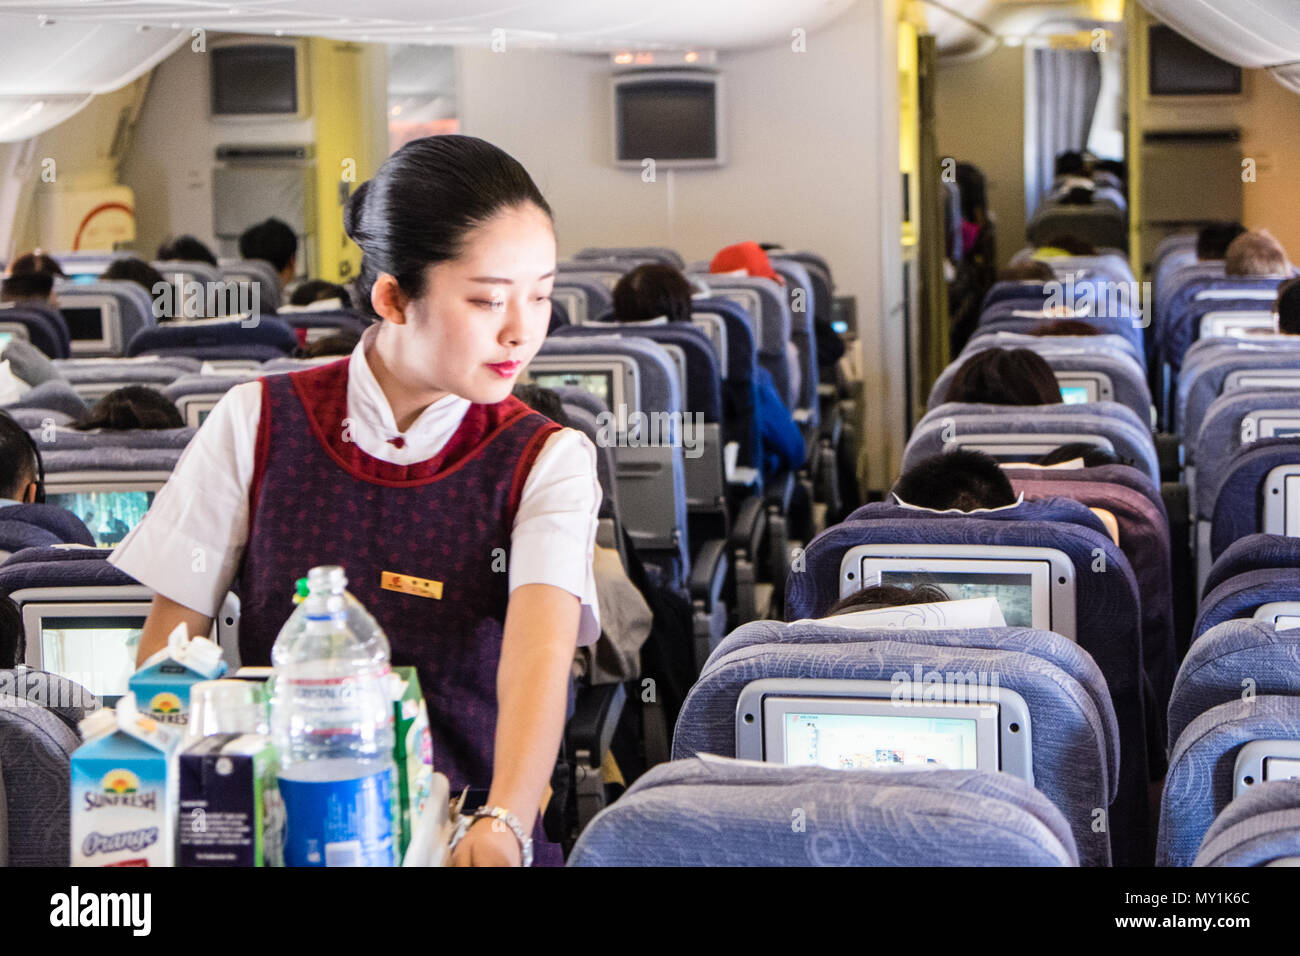 Interior,inside,Air China,flight,airline,stewardess,flight,cabin,crew,serving,service,drinks,food,on,flight,from,Beijing,Asia,Asian,to,London,Europe. Stock Photo